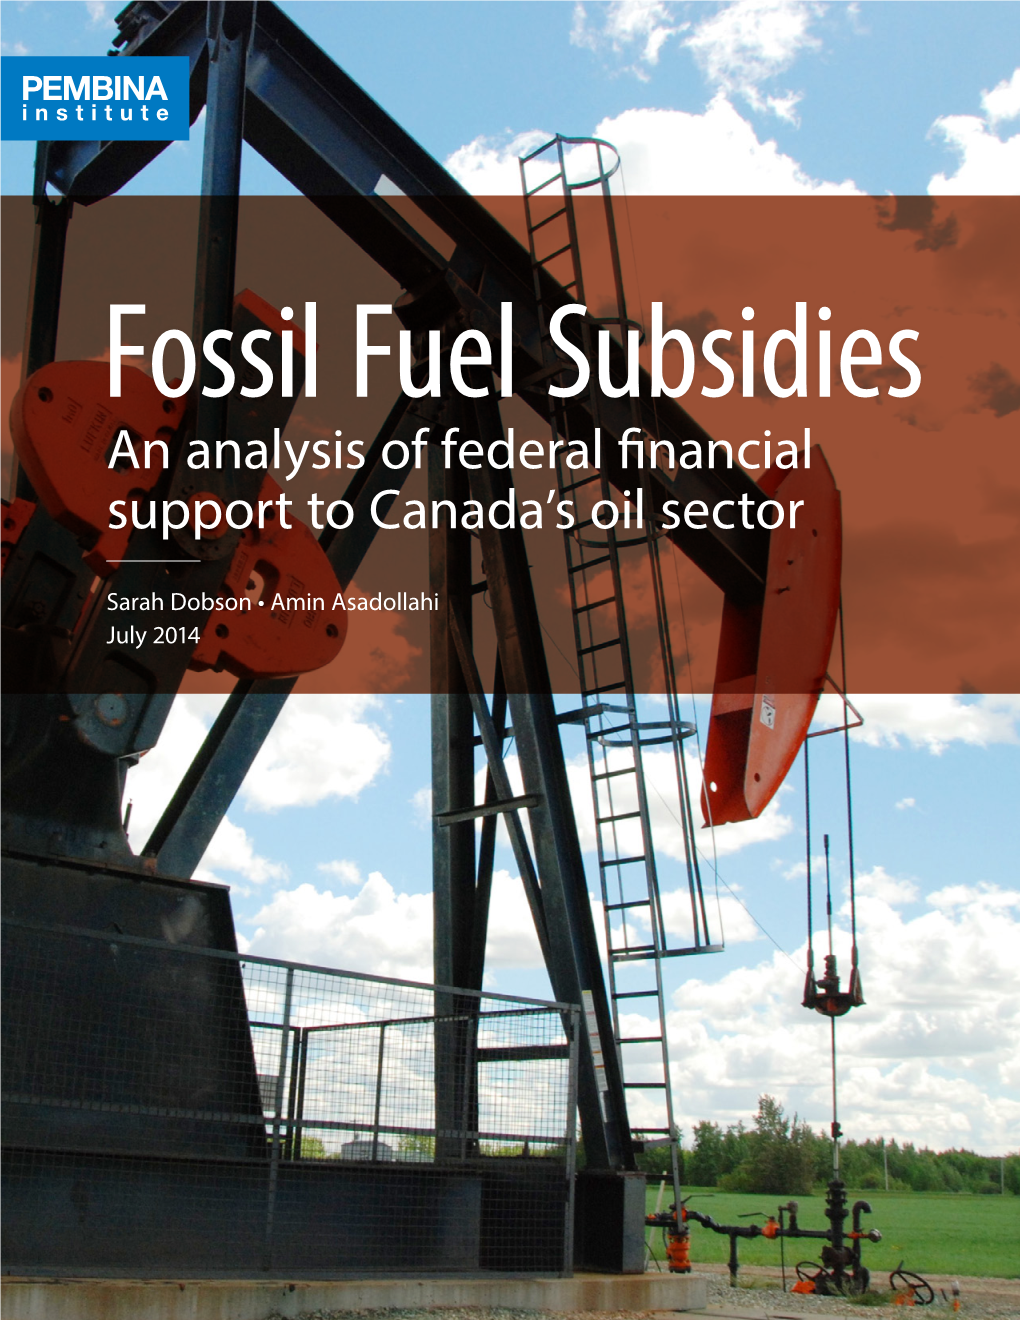 Fossil Fuel Subsidies: an Analysis of Federal Financial Support to Canada's Oil Sector